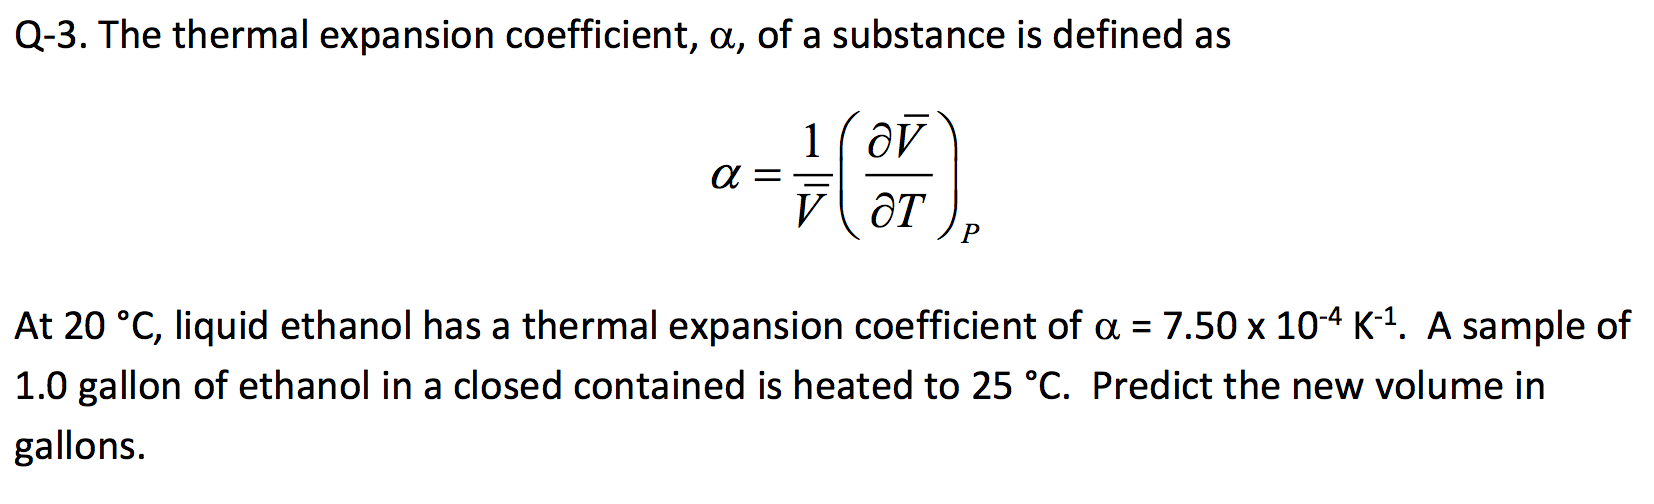 Q-3. The thermal expansion coefficient, a, of a substance is defined as
1( ôv
V OT
At 20 °C, liquid ethanol has a thermal expansion coefficient of a = 7.50 x 104 K1. A sample of
%D
1.0 gallon of ethanol in a closed contained is heated to 25 °C. Predict the new volume in
gallons.
